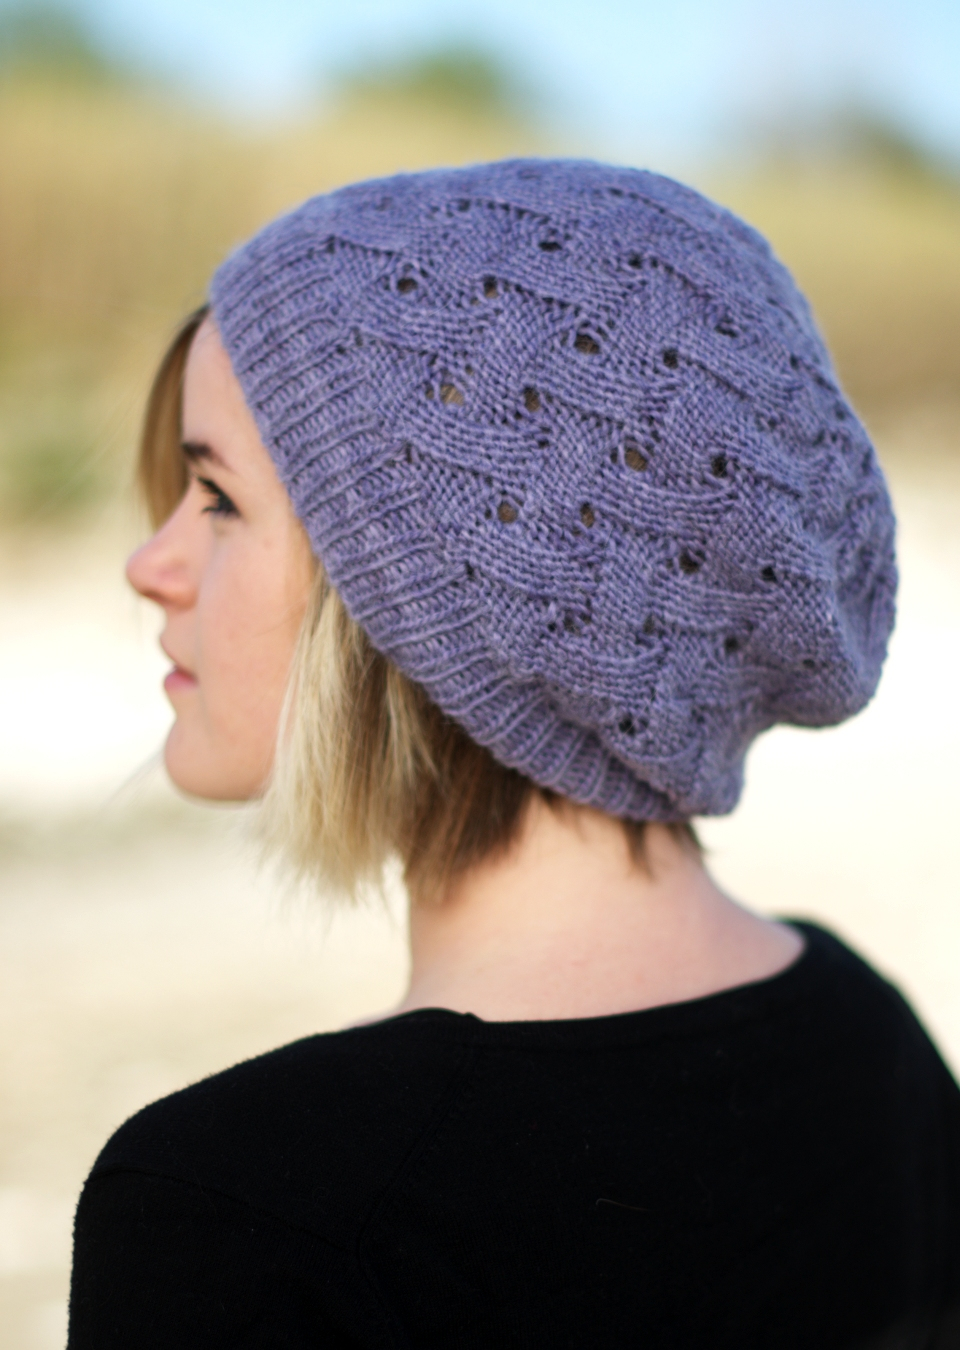 Free Knitting Patterns For Hats Uk Various Knitting Patterns The Best One Knitting Patterns For Hats